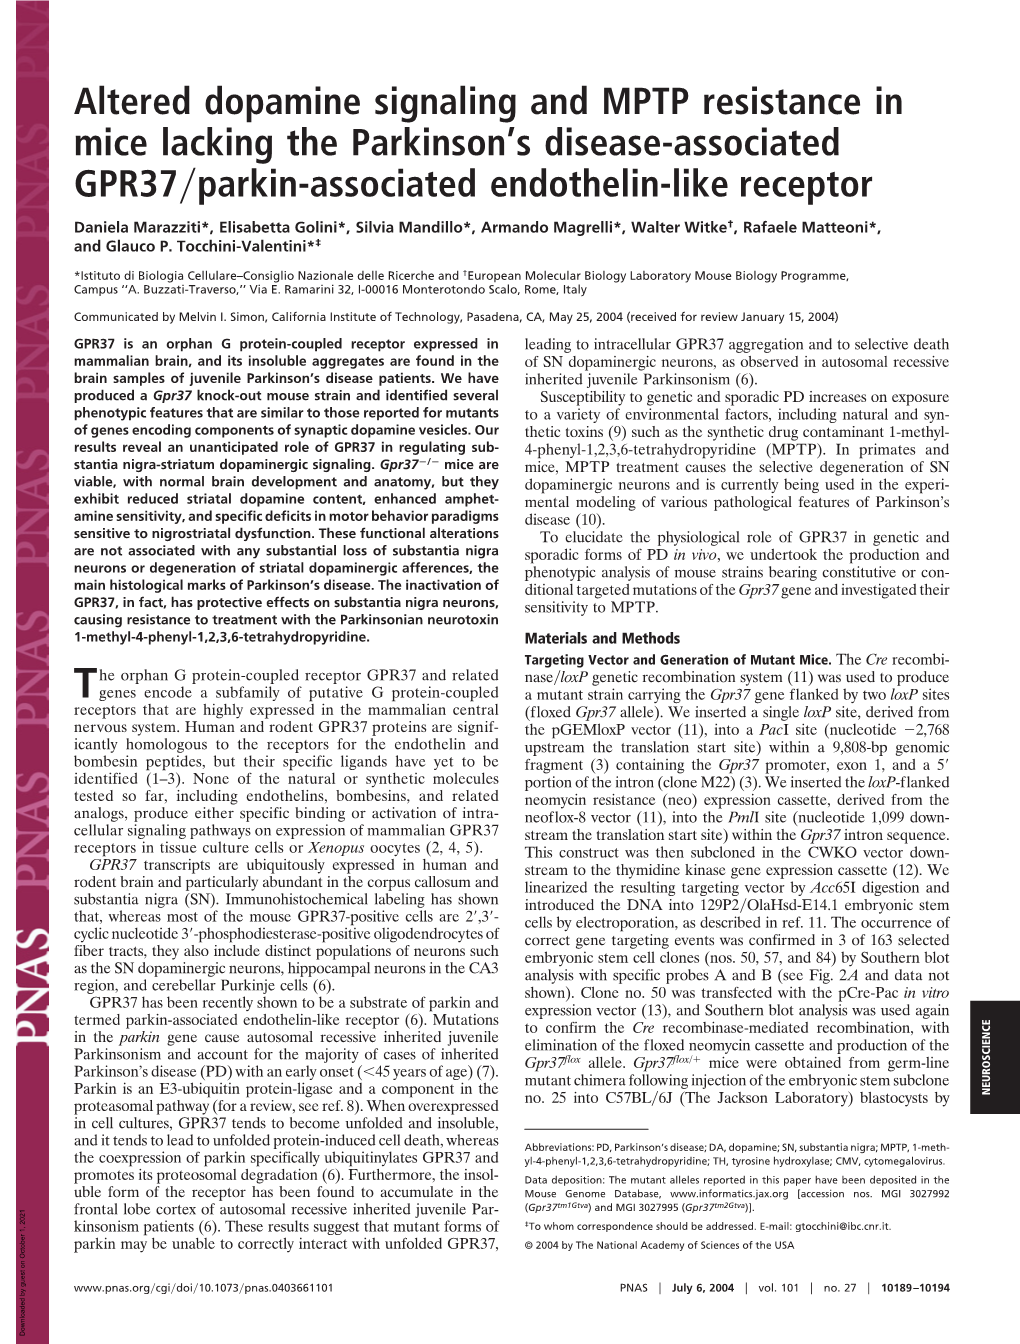 Altered Dopamine Signaling and MPTP Resistance in Mice Lacking the Parkinson's Disease-Associated GPR37 Parkin-Associated Endo